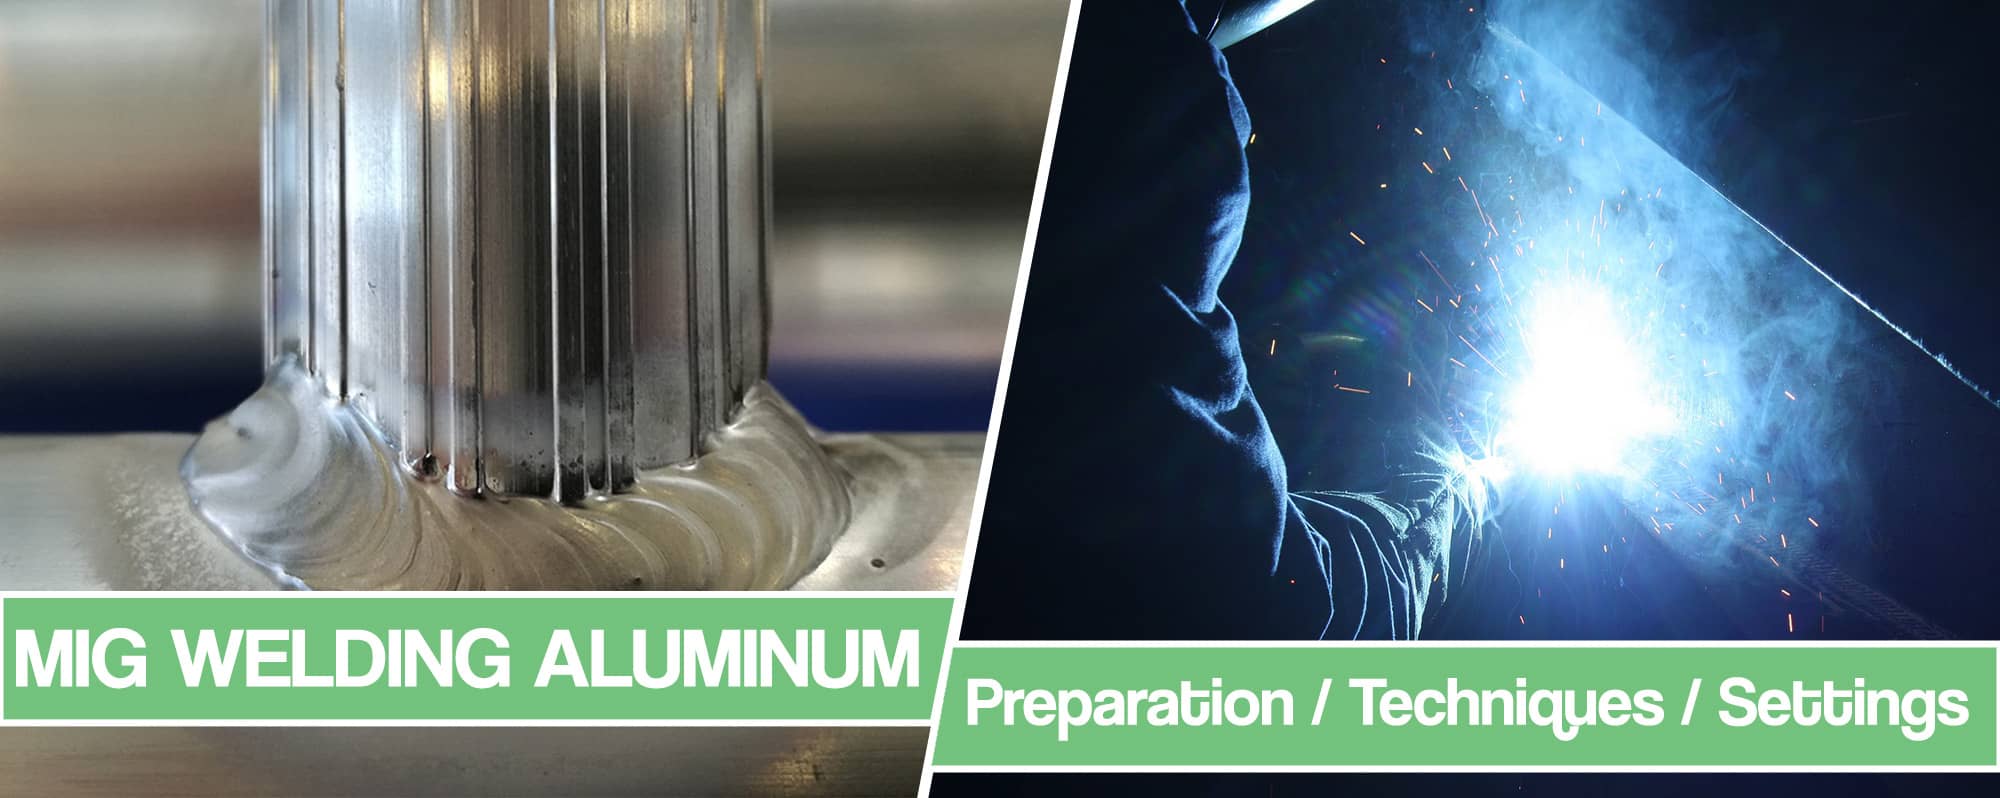 Feature image for MIG Welding Aluminum article